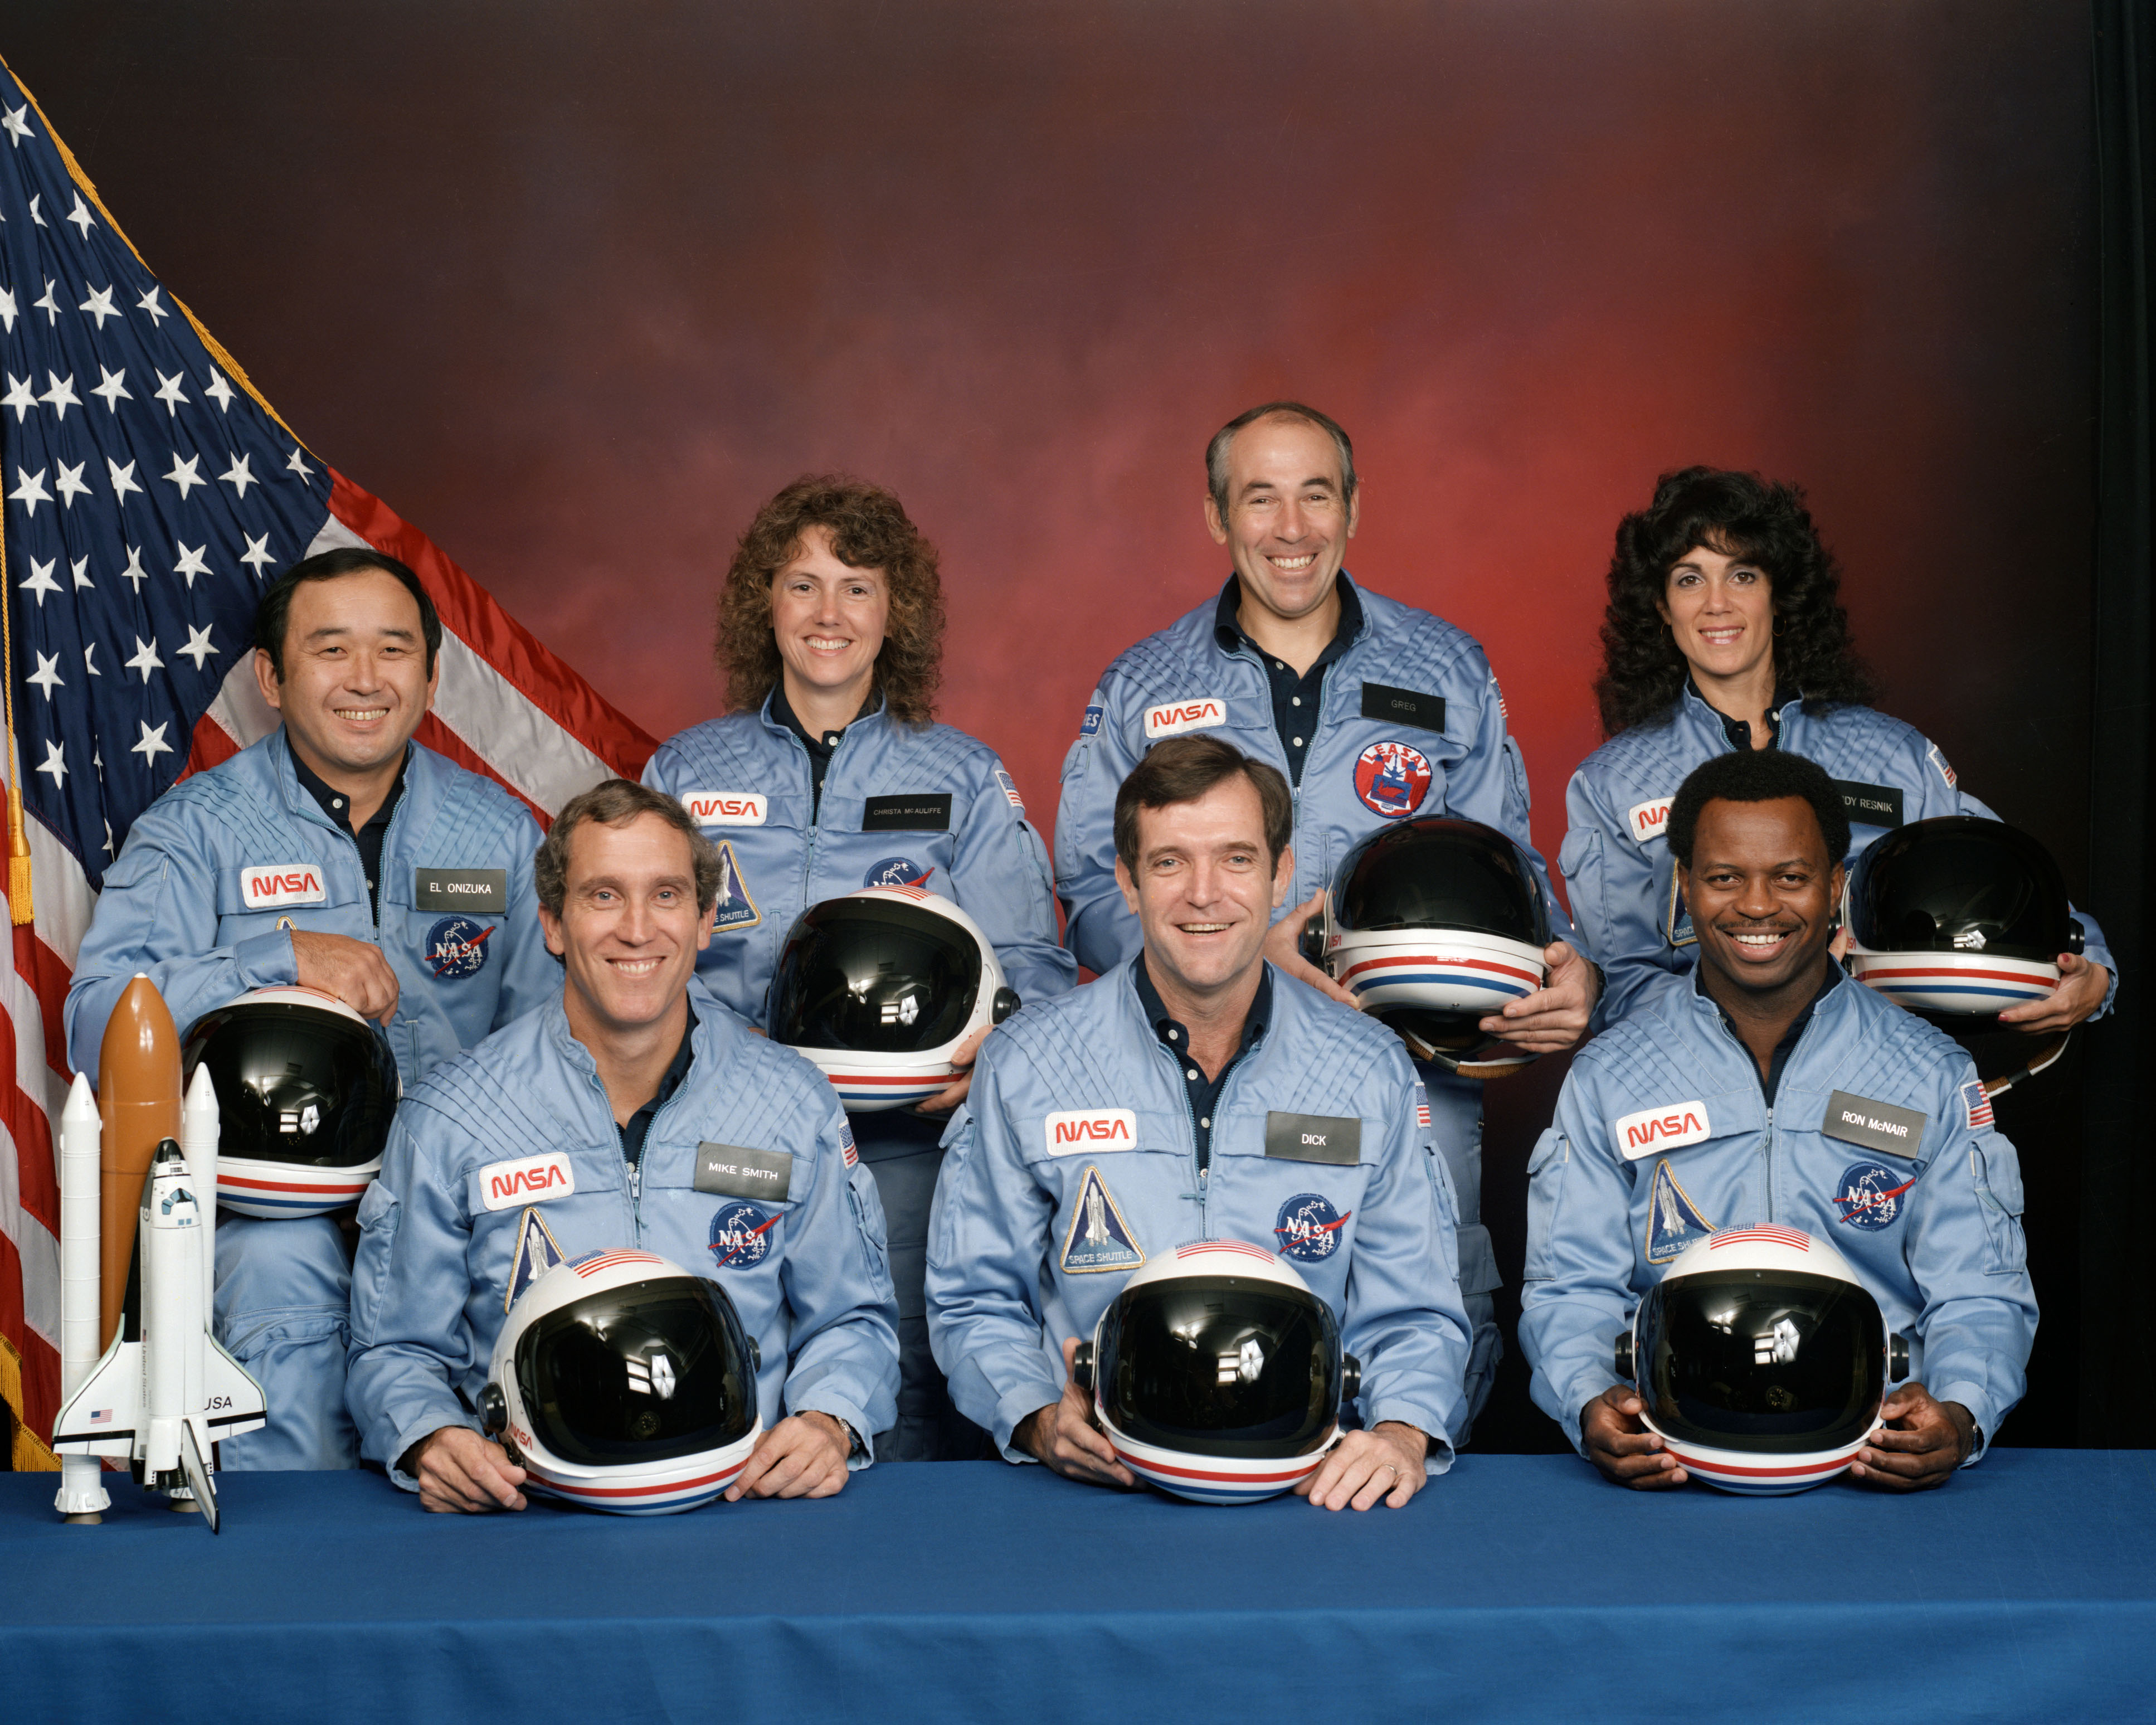 January 28, 1986: The Challenger Space Shuttle Explodes After Liftoff, Killing Seven Astronauts